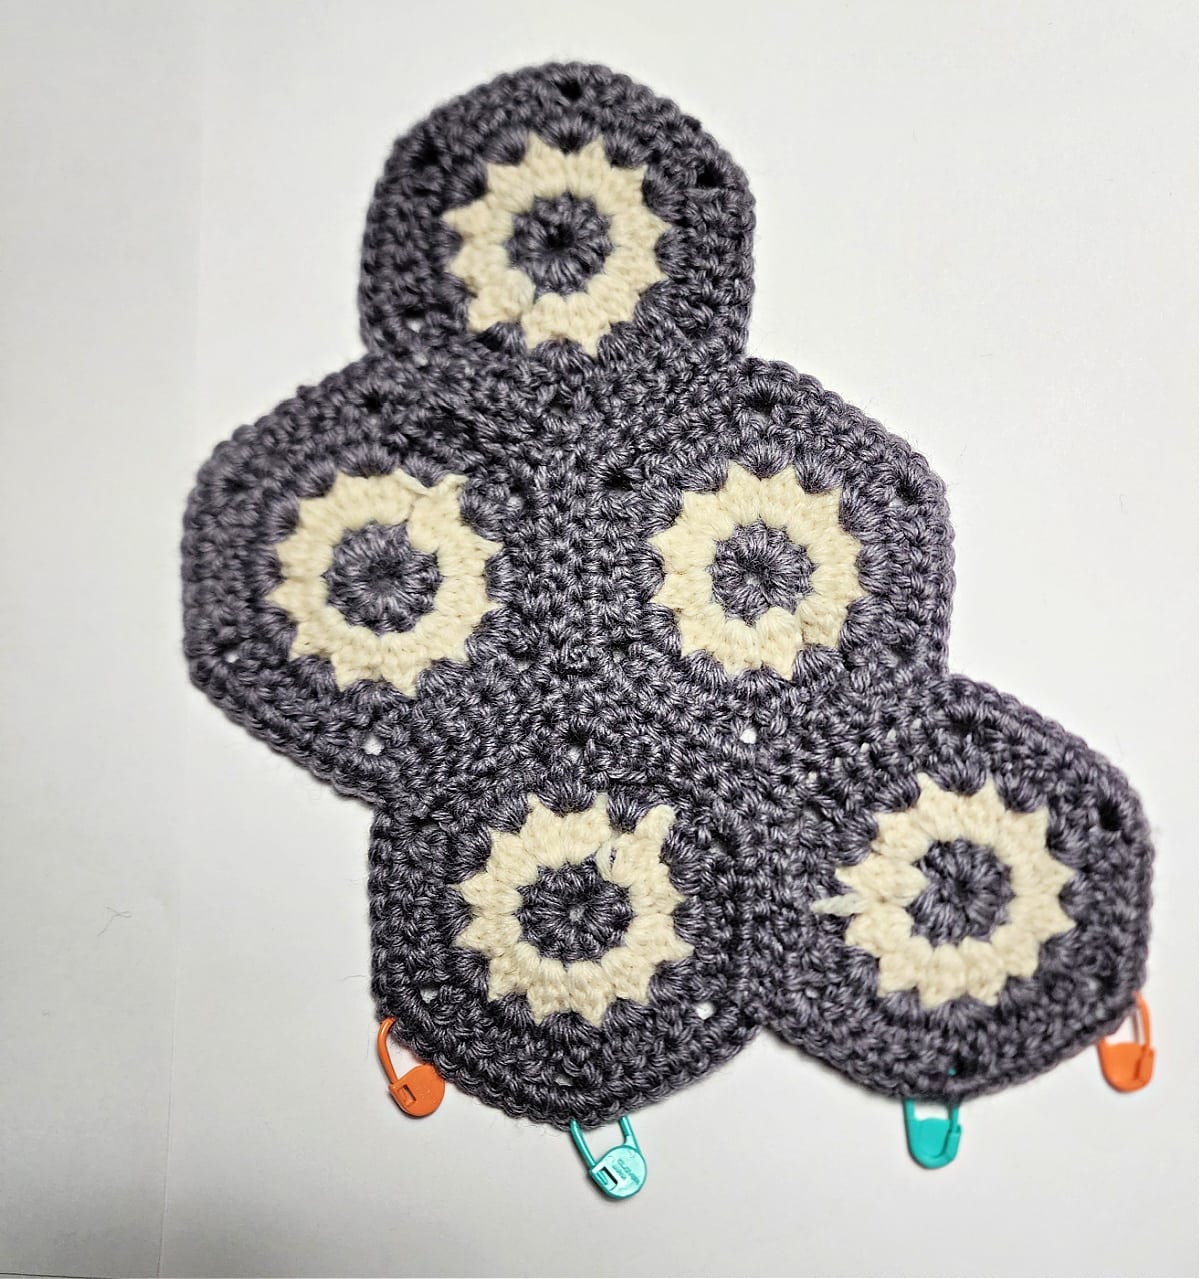 Hexagons with wrong side facing up to complete hexagon construction.